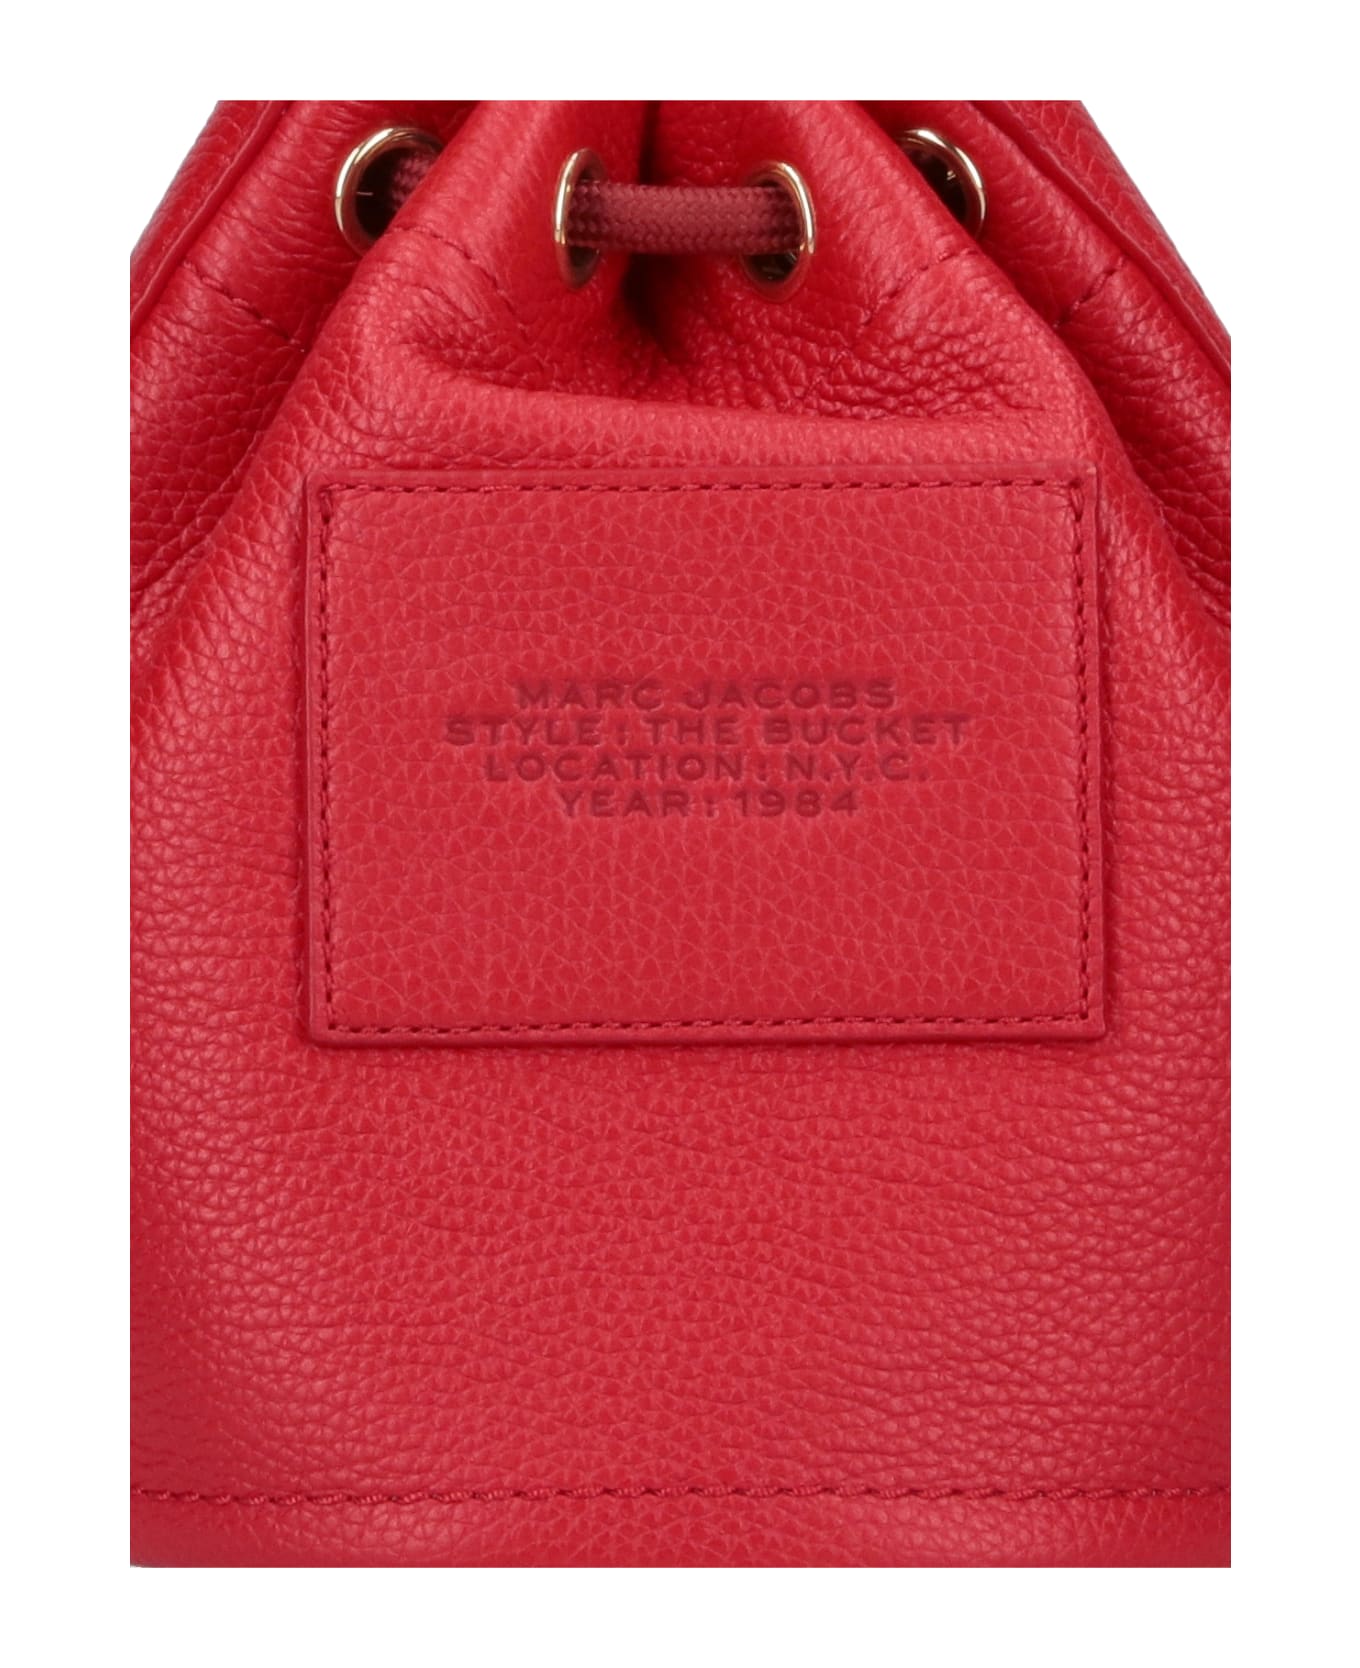 Marc Jacobs The Leather Bucket Bag - red